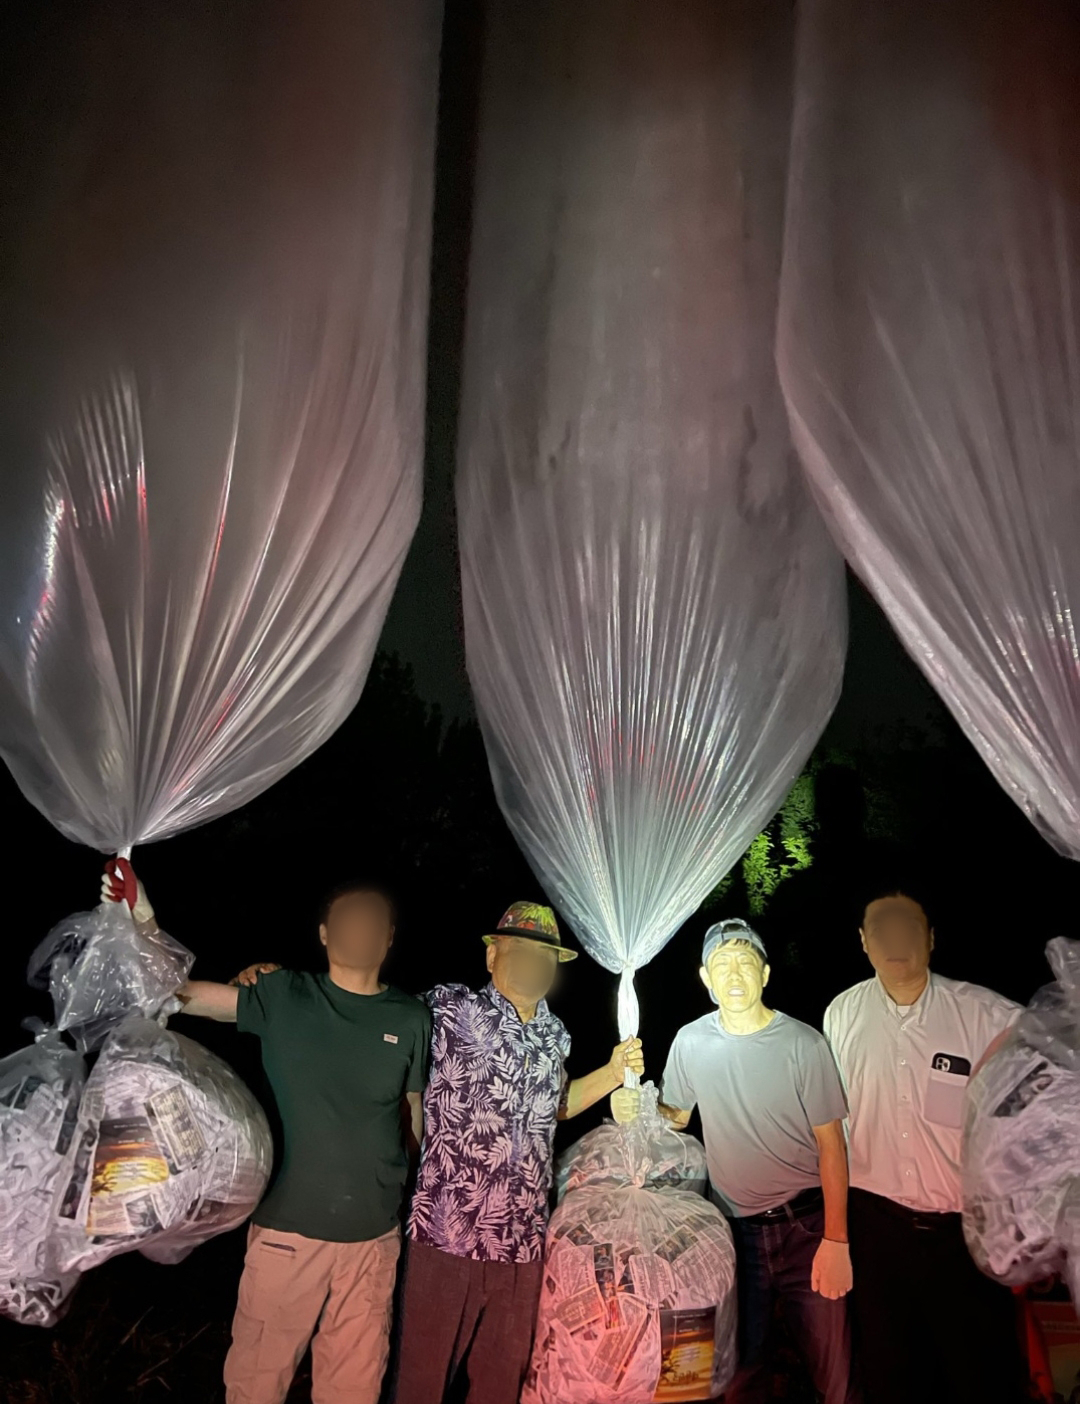 A group of North Korean defectors tried to fly balloons carrying K-pop content early Thursday, with some successfully entering North Korean skies, according to the South Korean Joint Chiefs of Staff. (Yonhap)